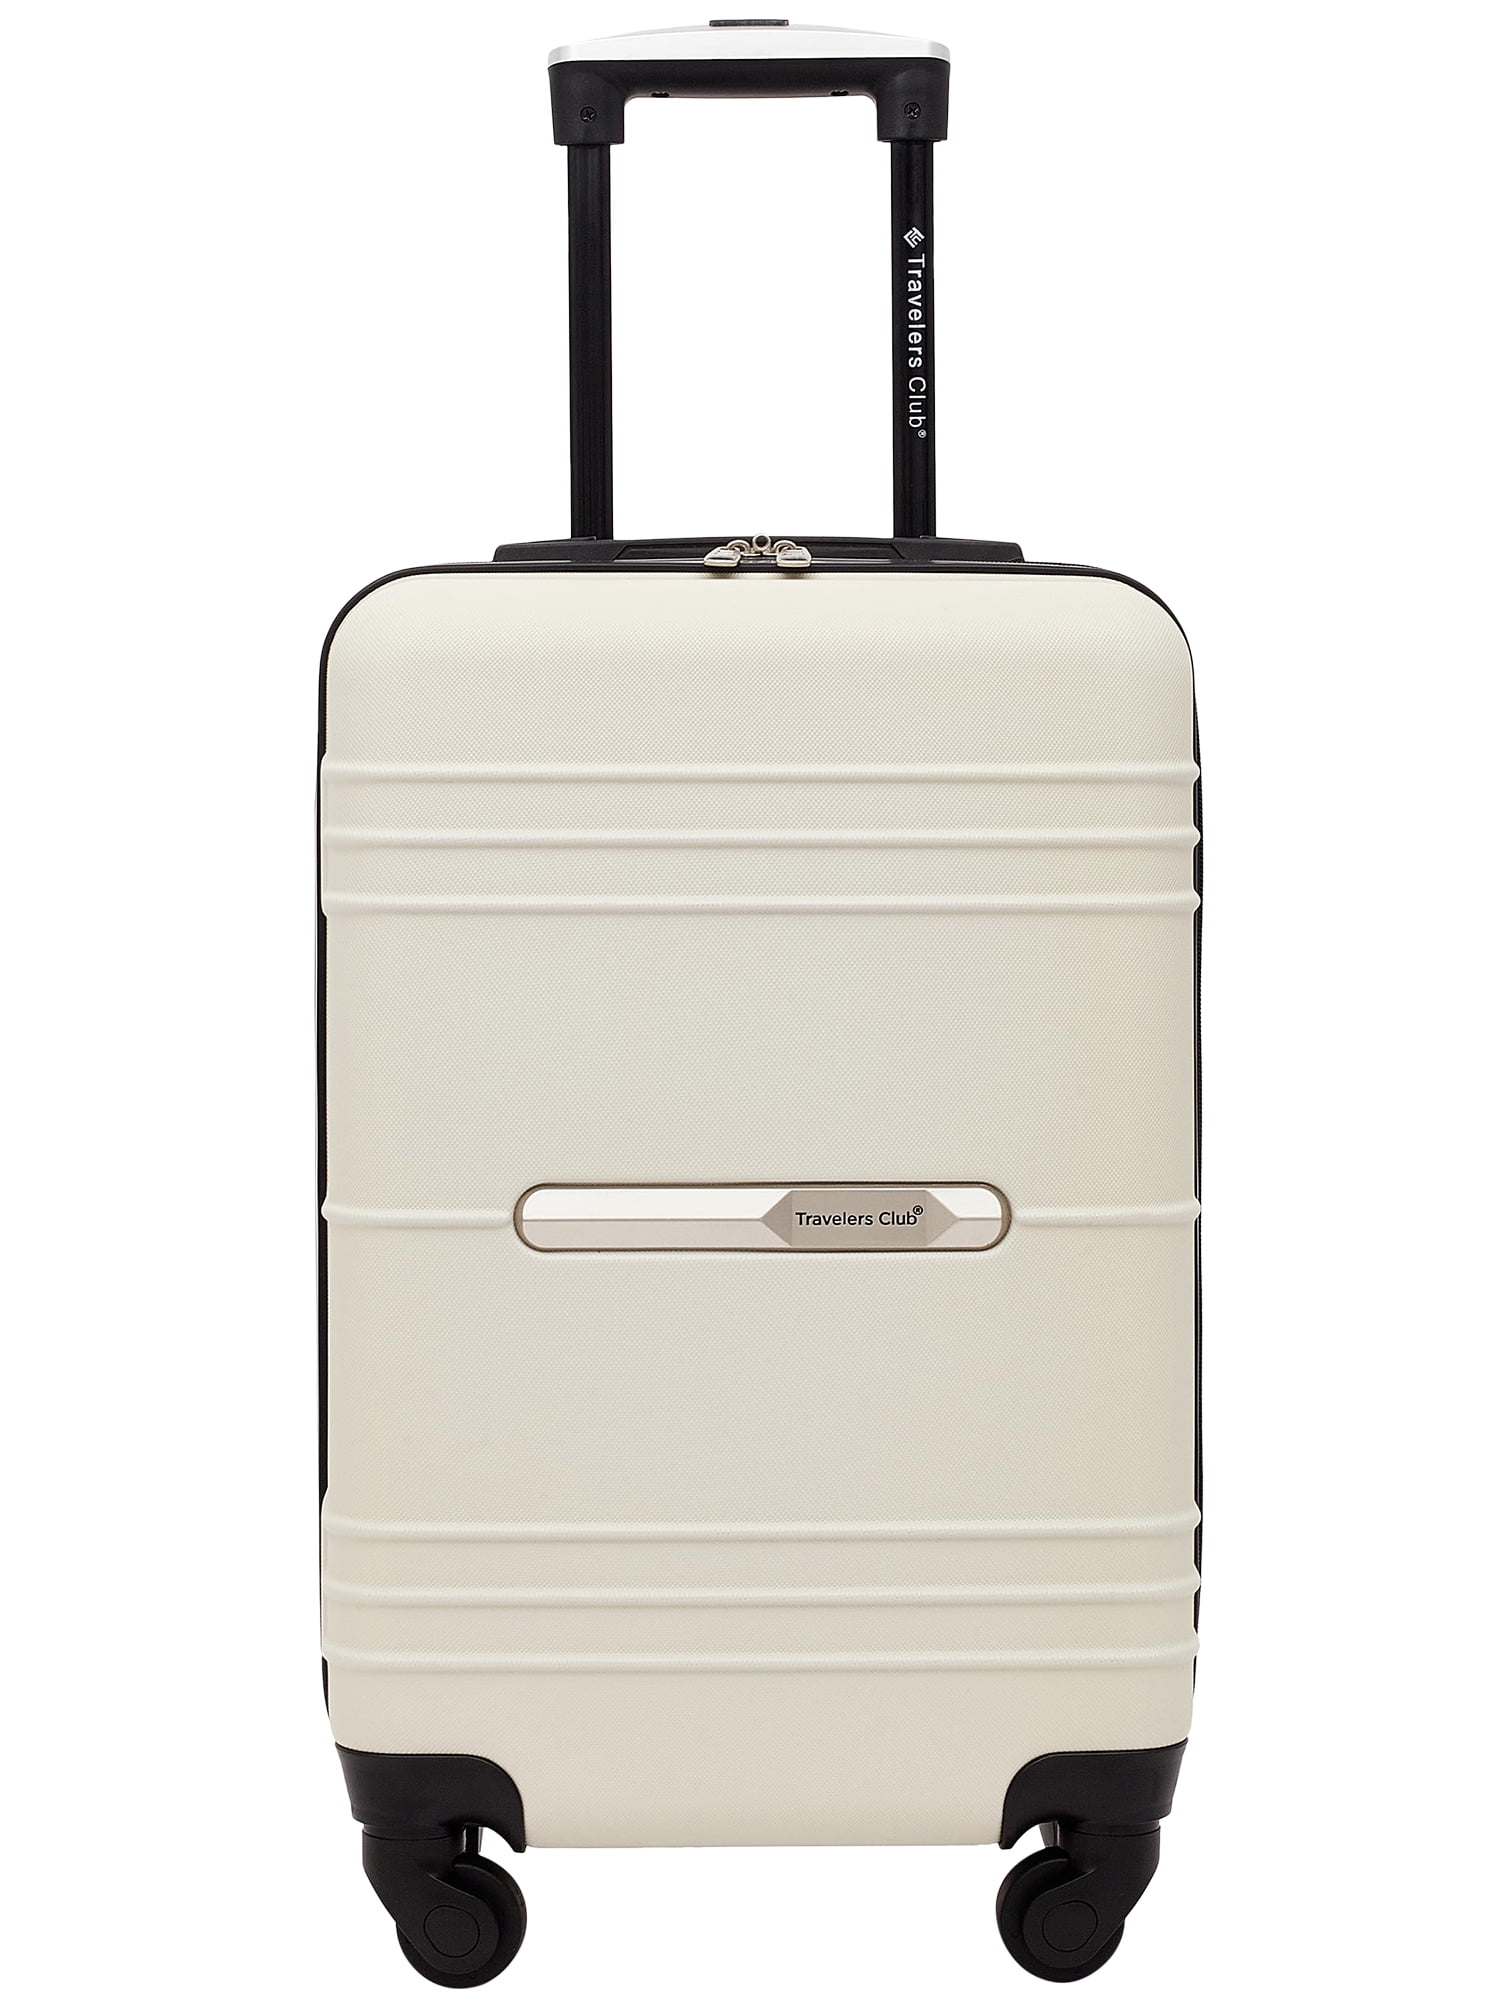 Buy Travelers Club Hardside Luggage, ABS 20 Carry-on Online at Lowest ...